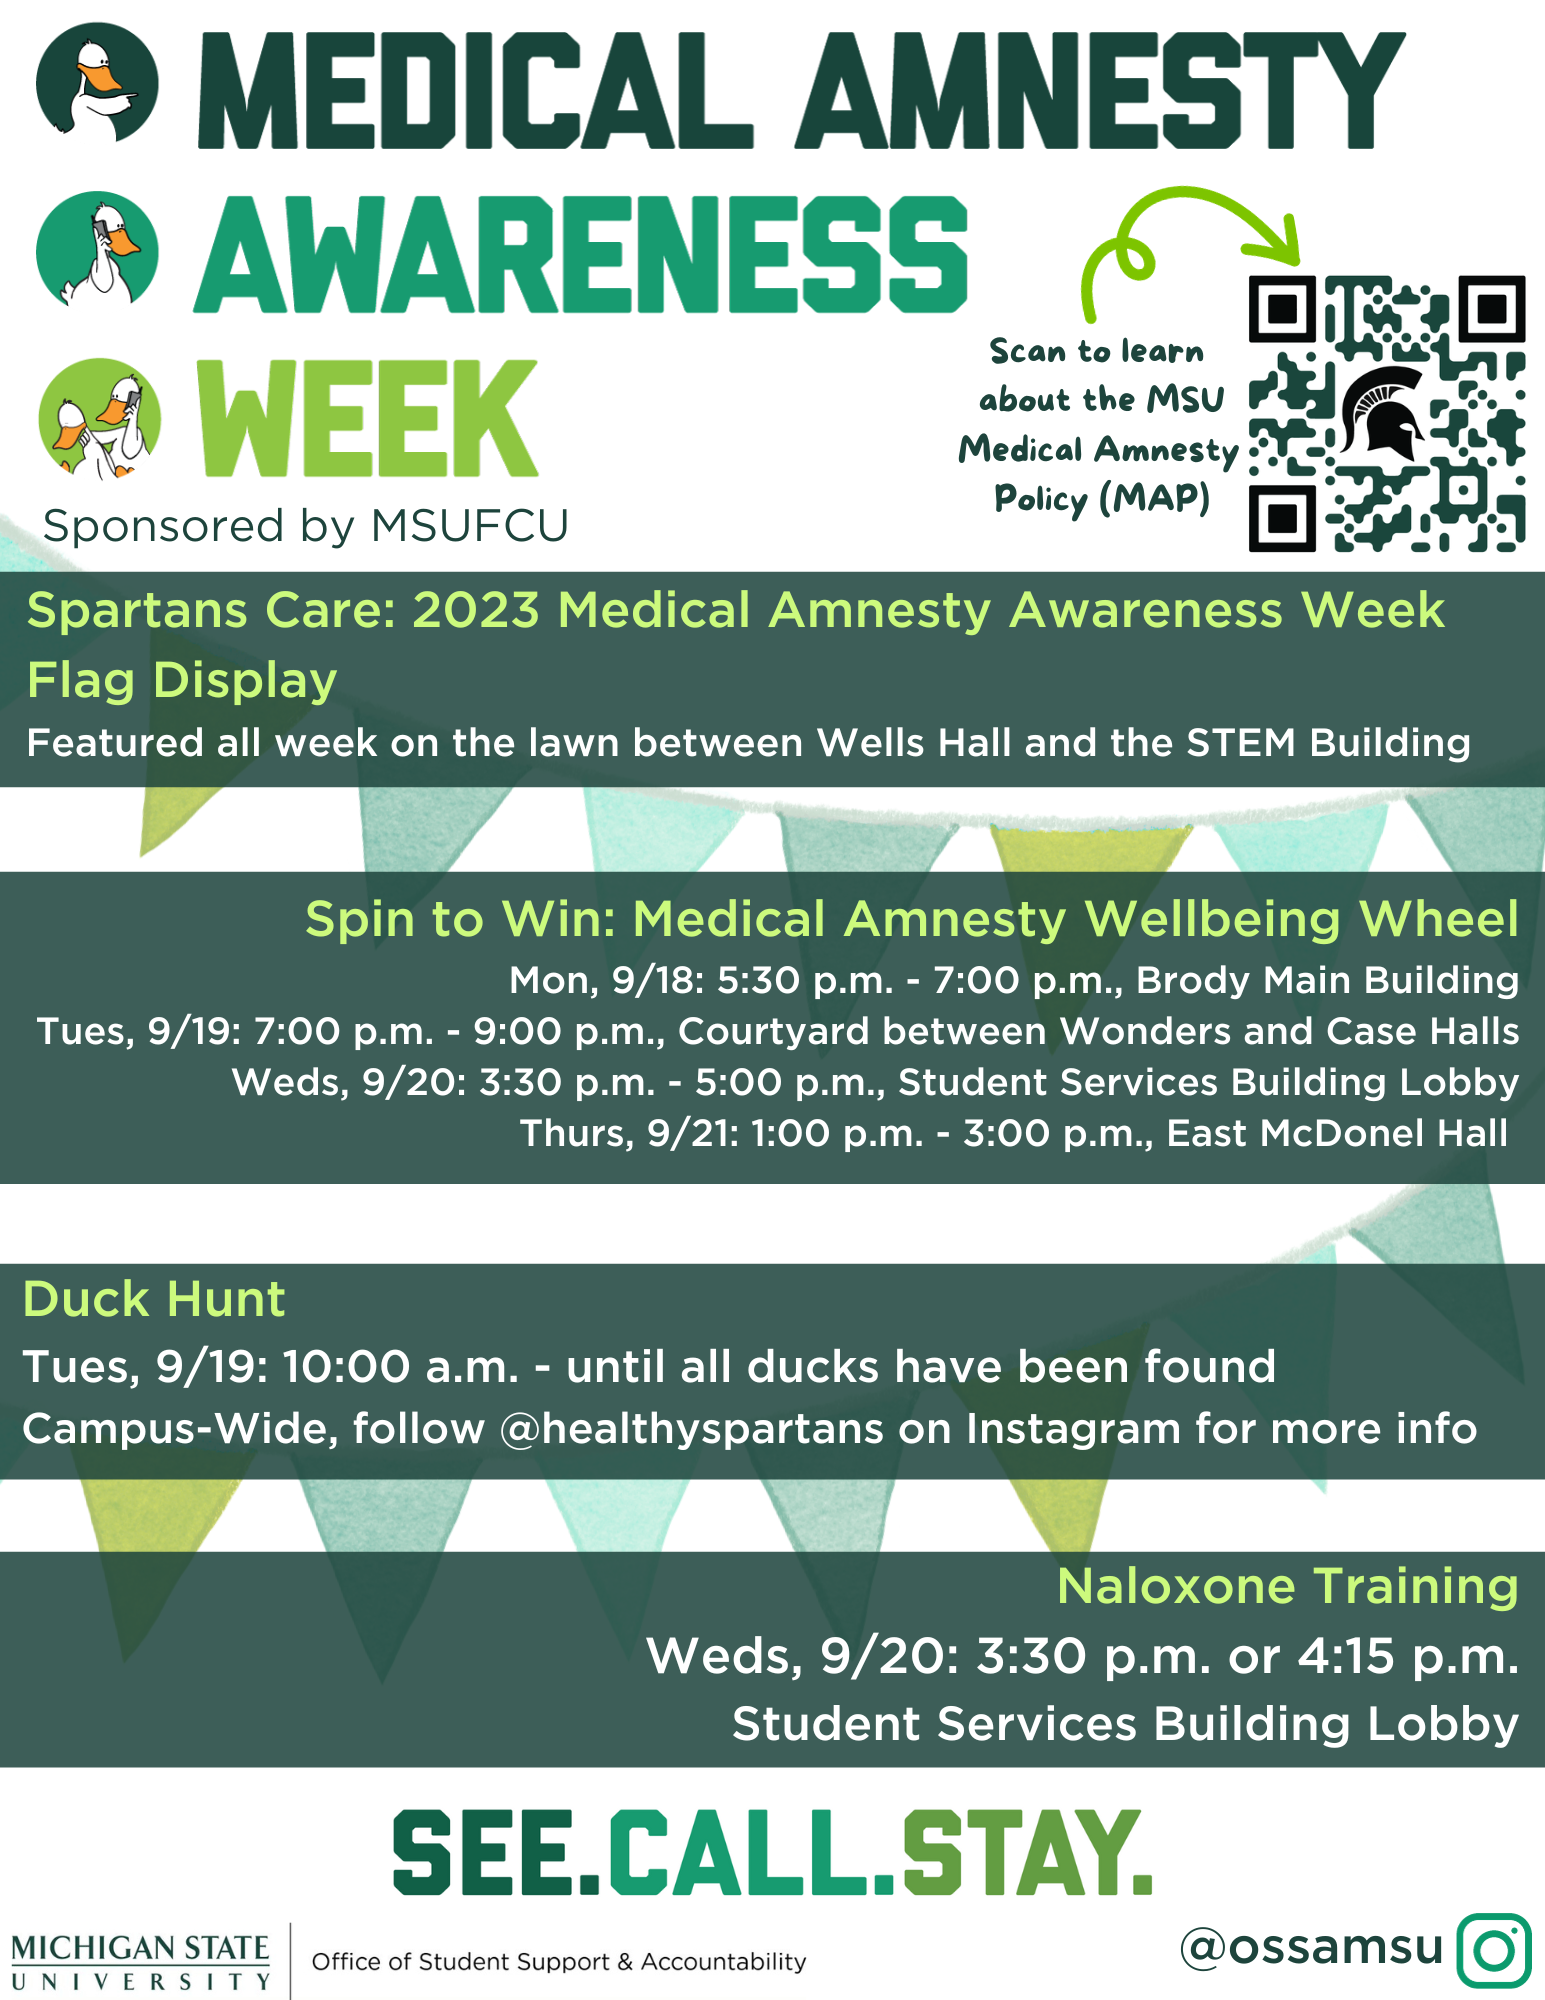 Medical Amnesty Awareness Week Events and InformationFlyer